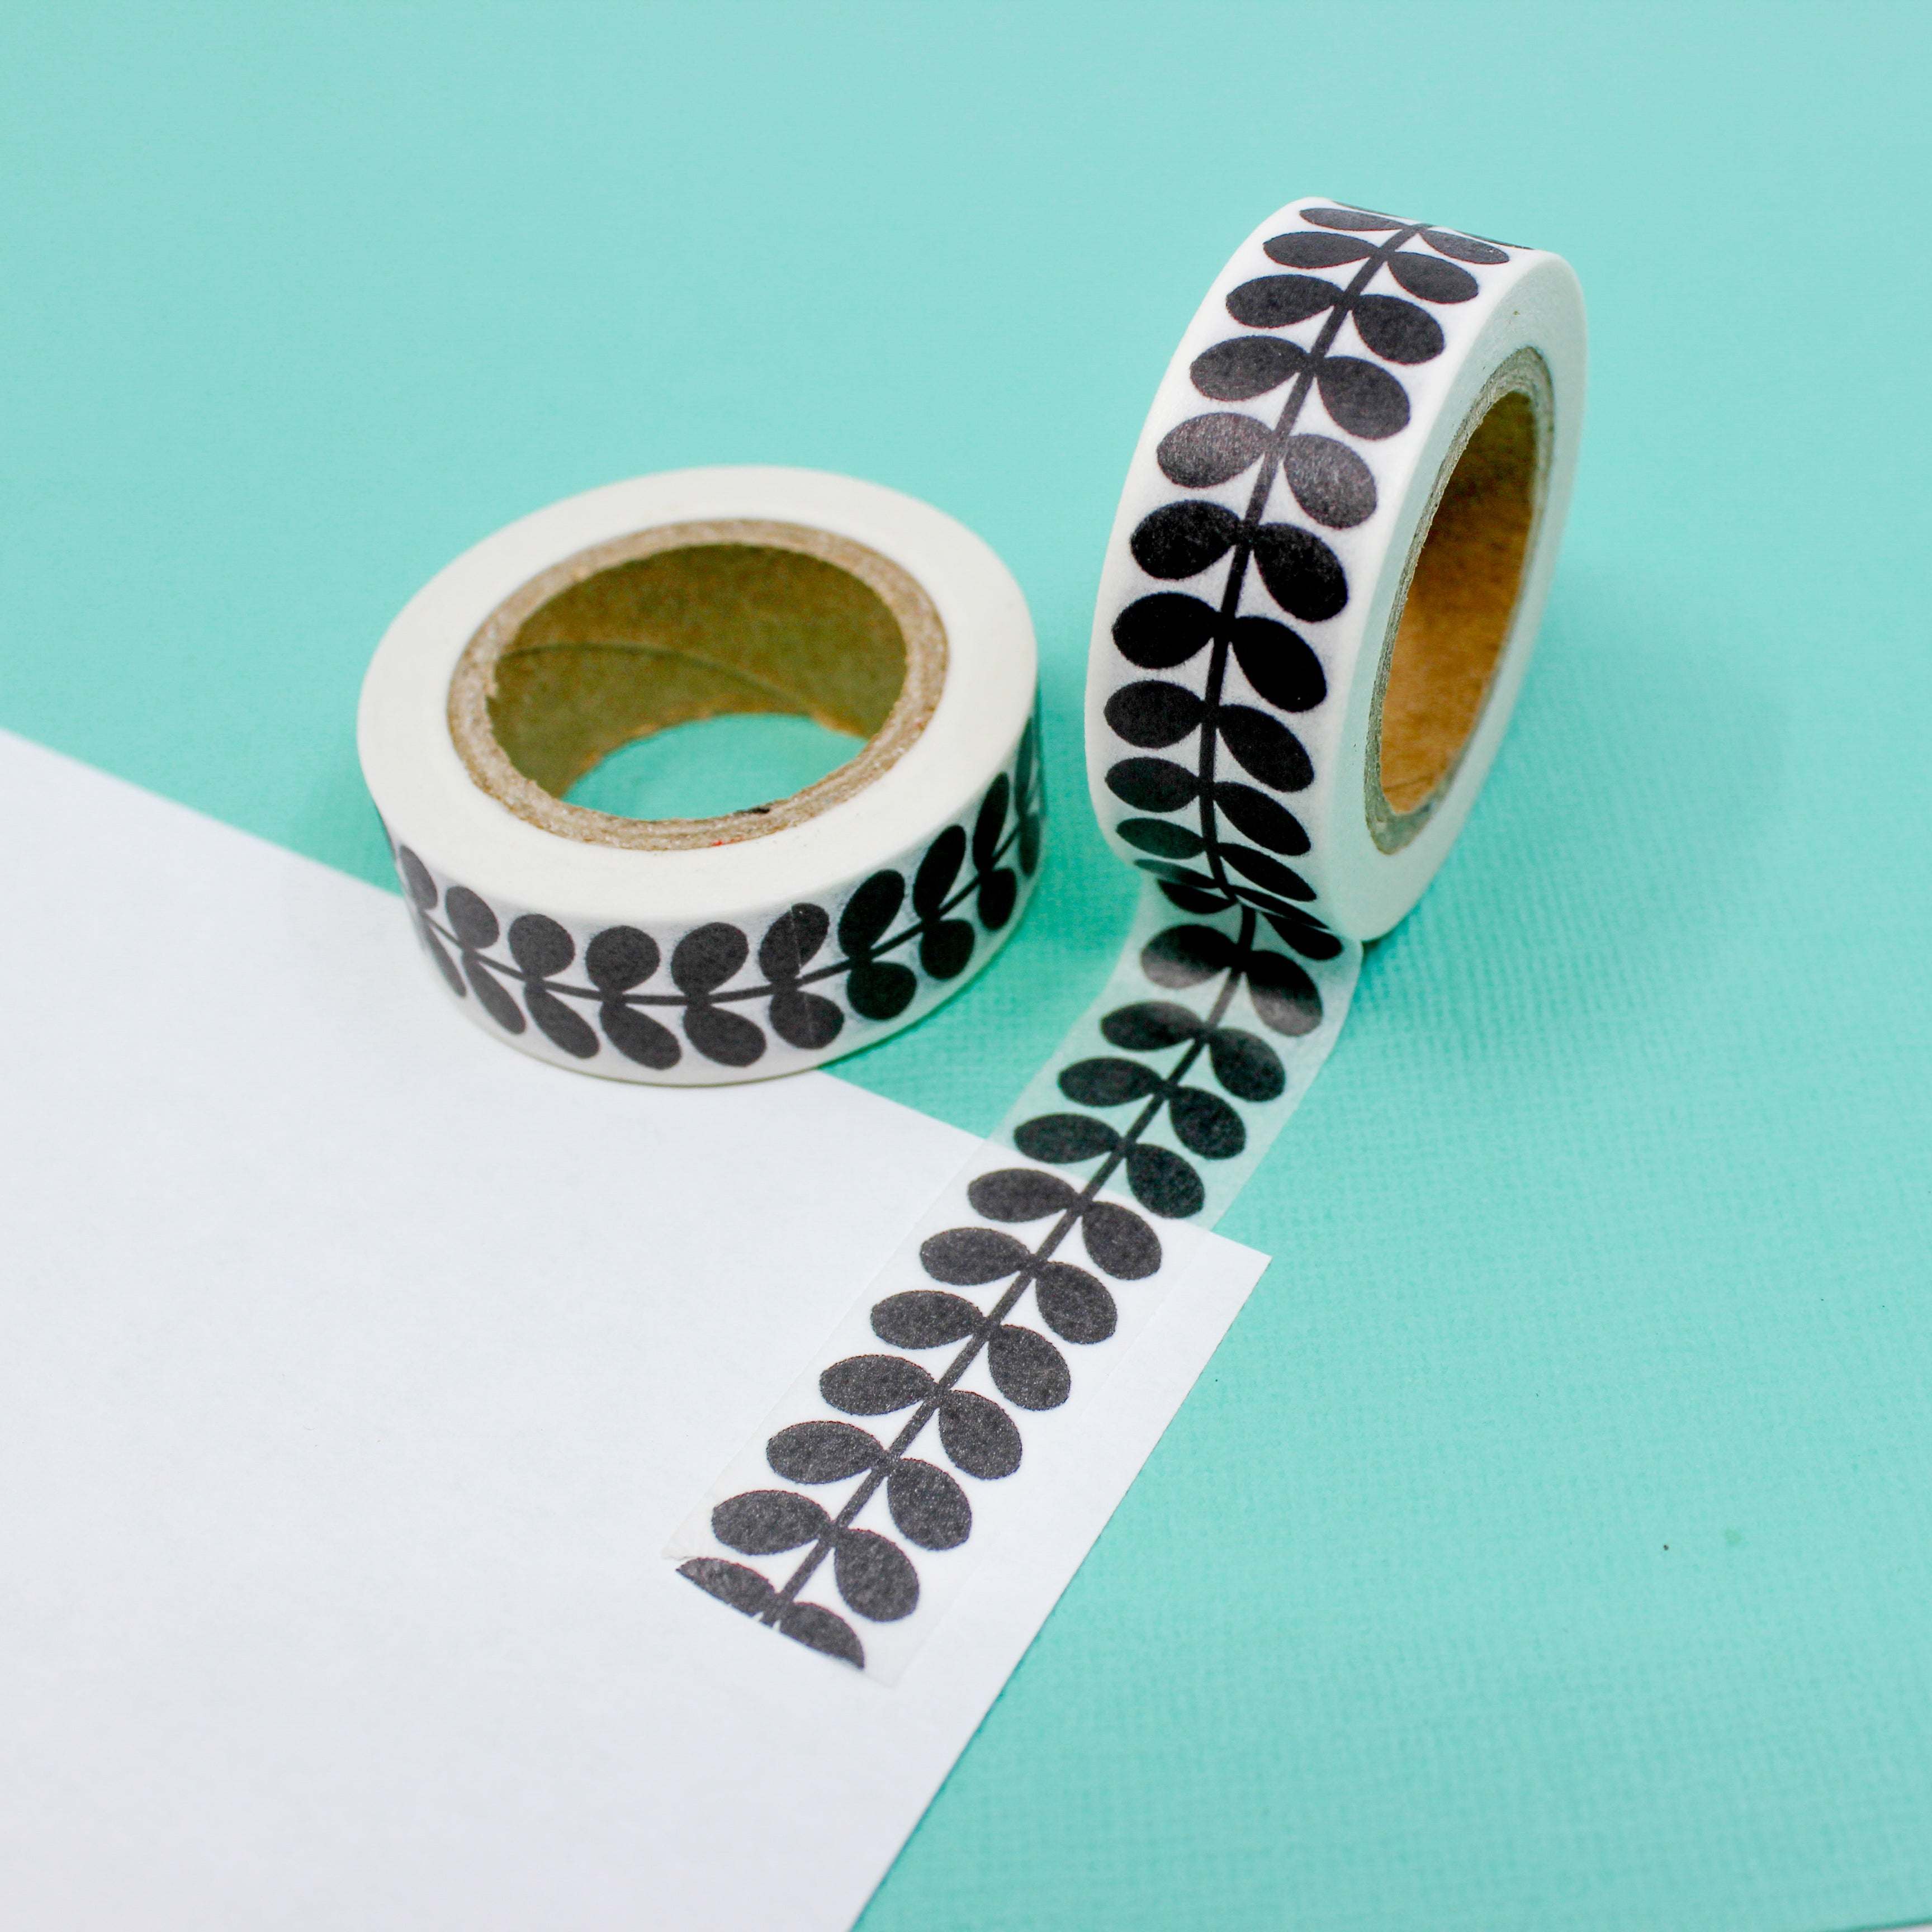 This is a black solid vines pattern washi tape from BBB Supplies Craft Shop